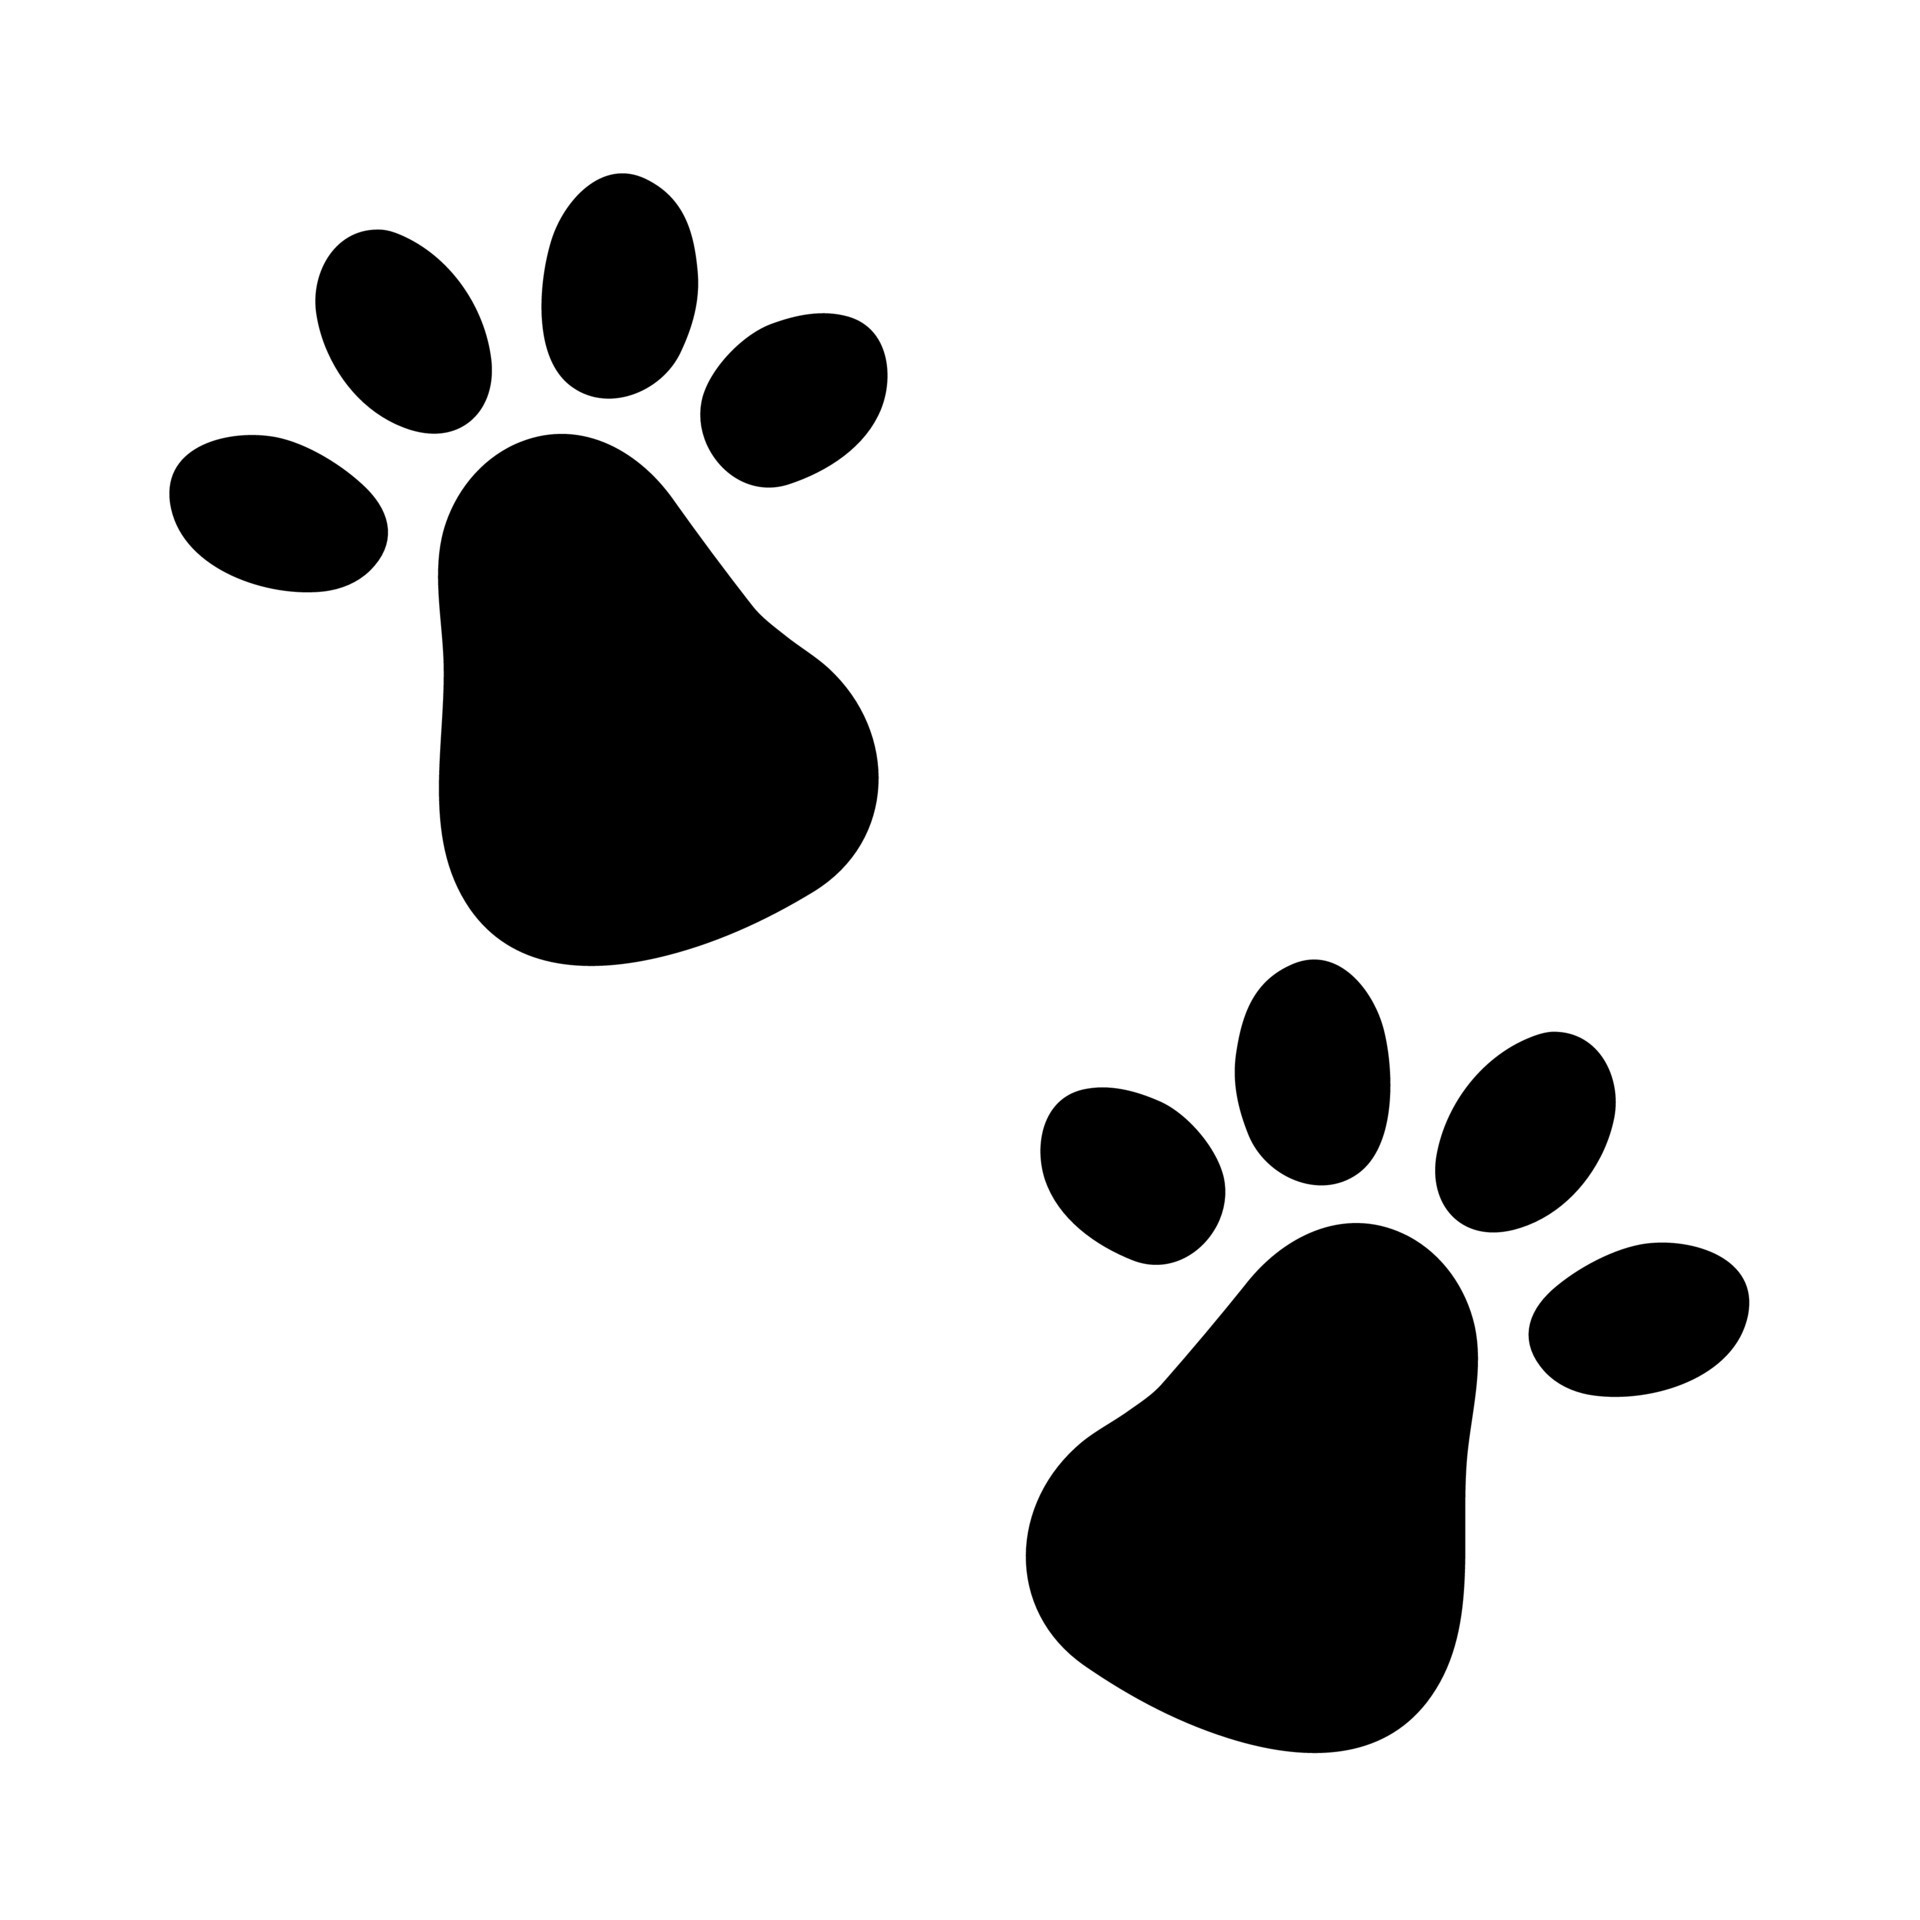 Paw Print Drawing - How To Draw A Paw Print Step By Step